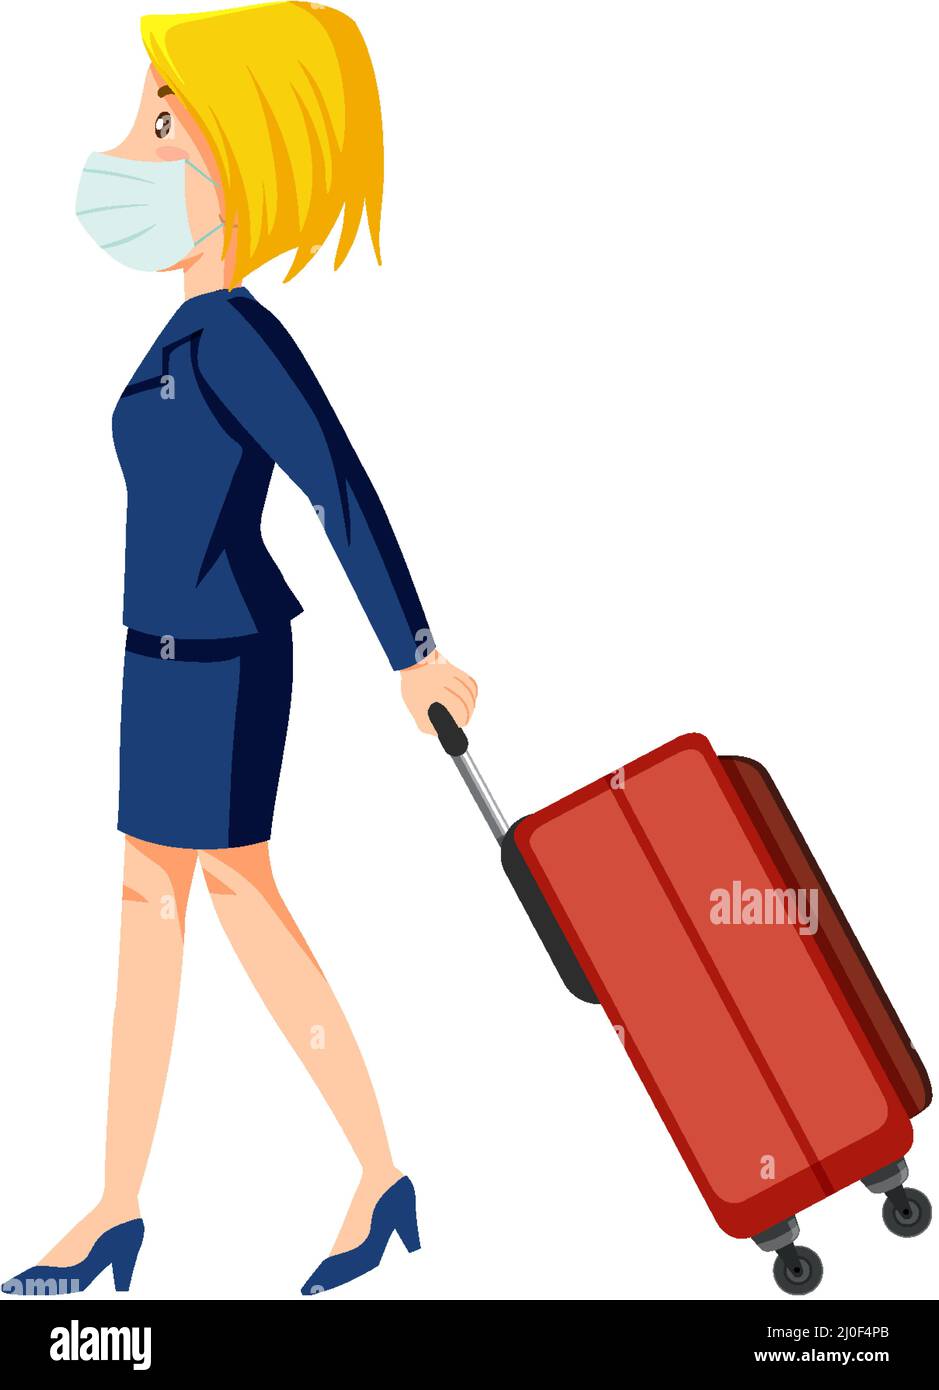 Side view of flight attendant dragging luggage illustration Stock Vector